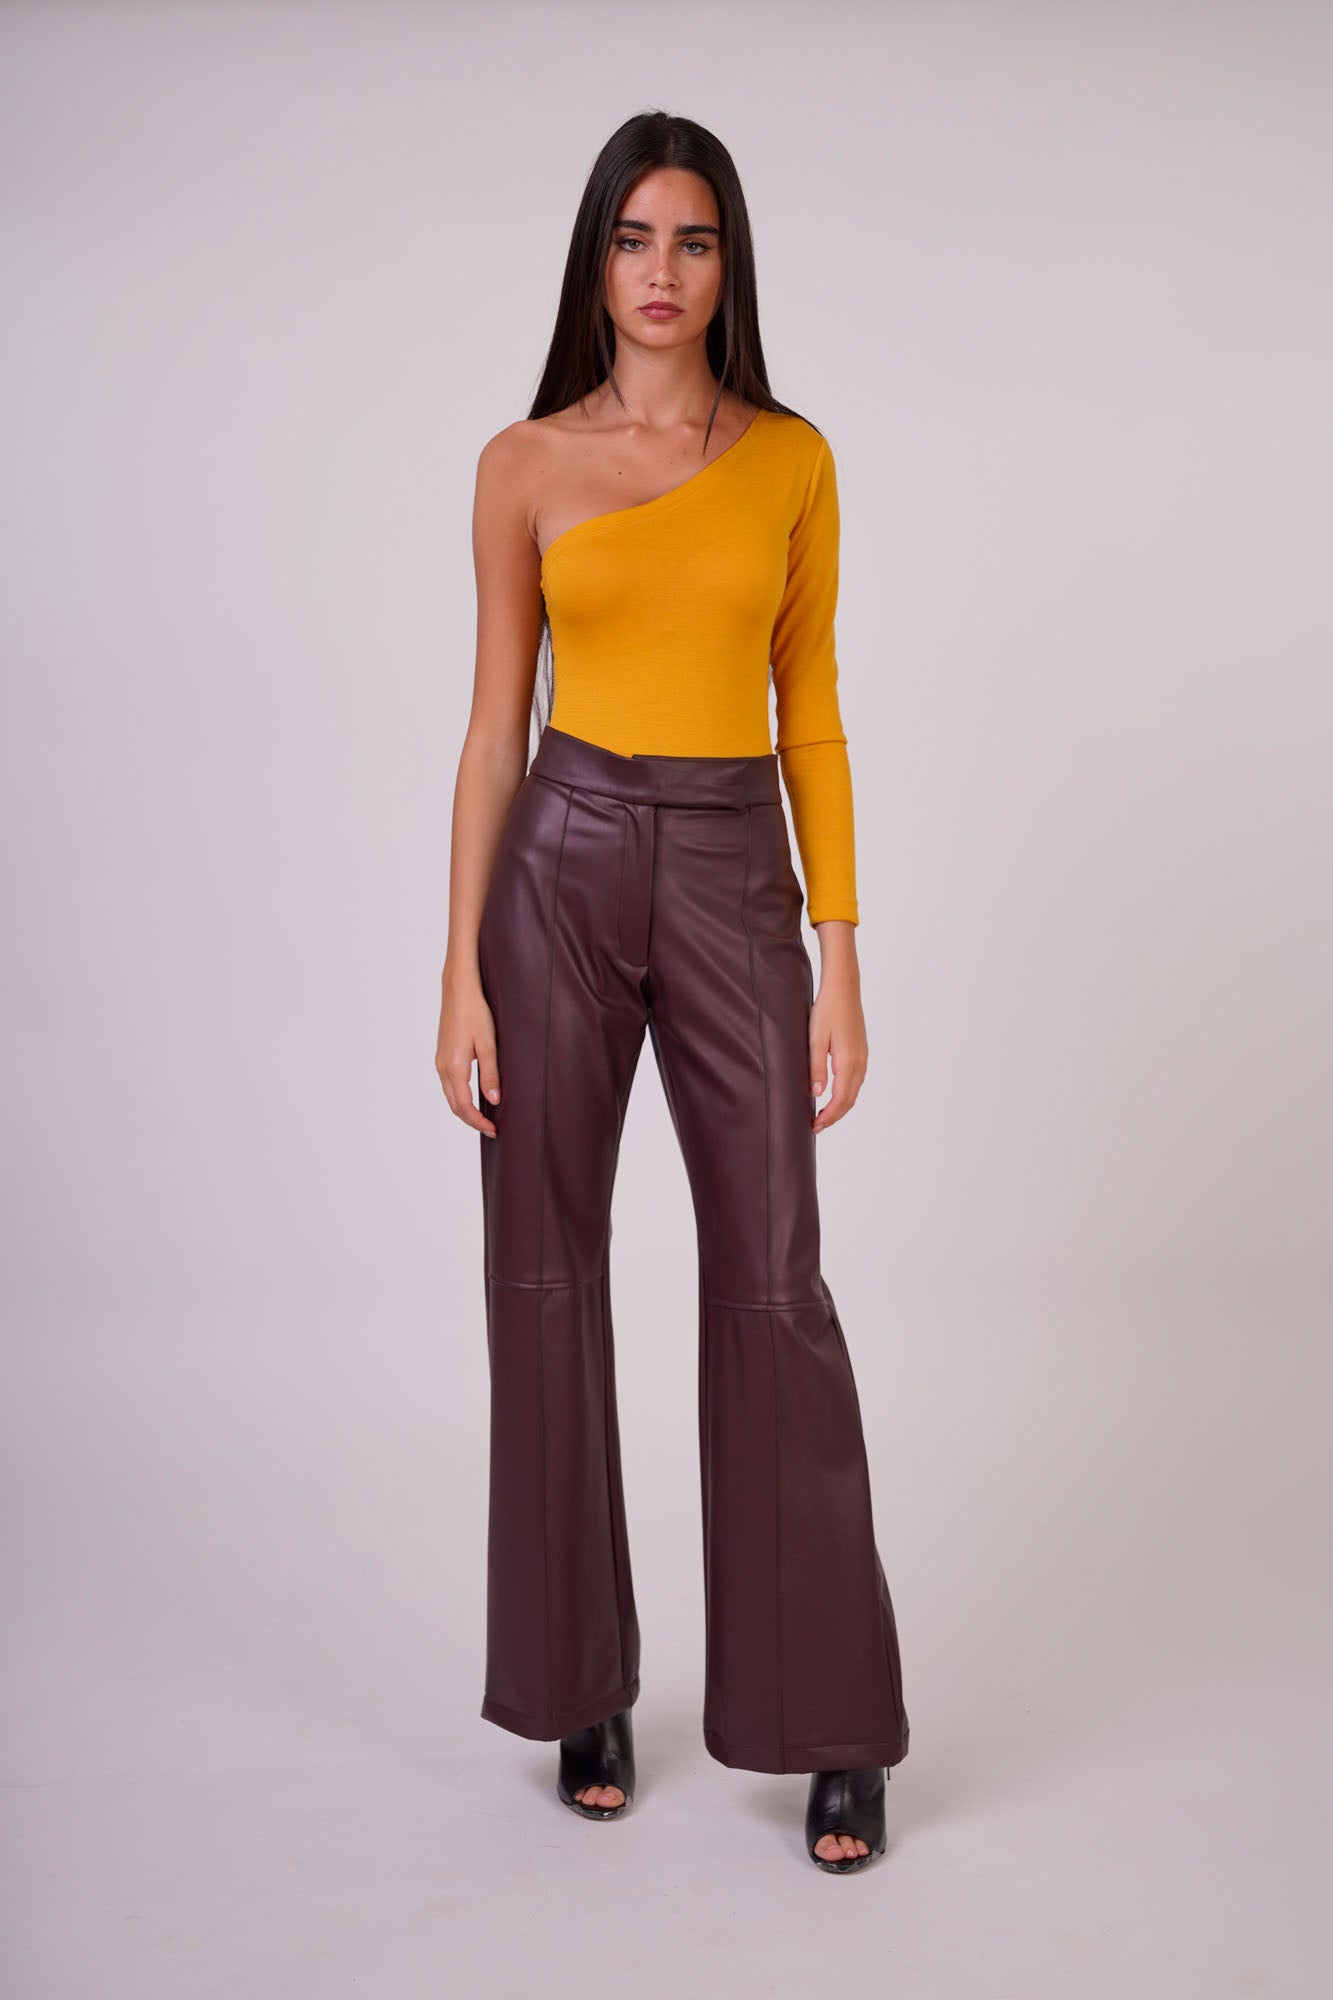 High-Rise Faux Leather Trousers